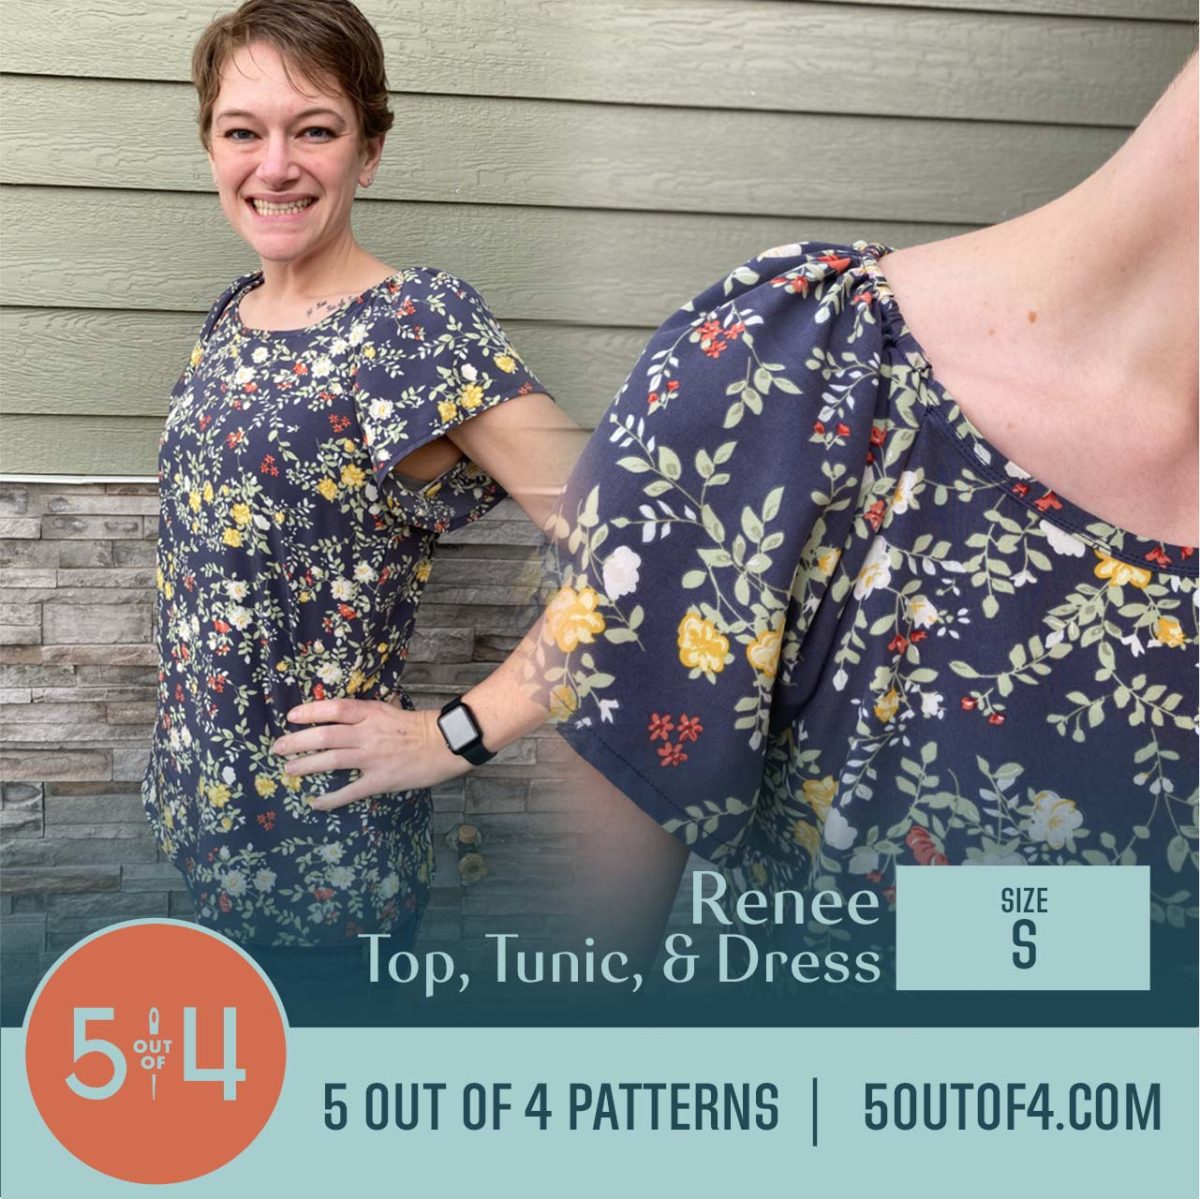 Renee Top, Tunic, and Dress - 5 out of 4 Patterns